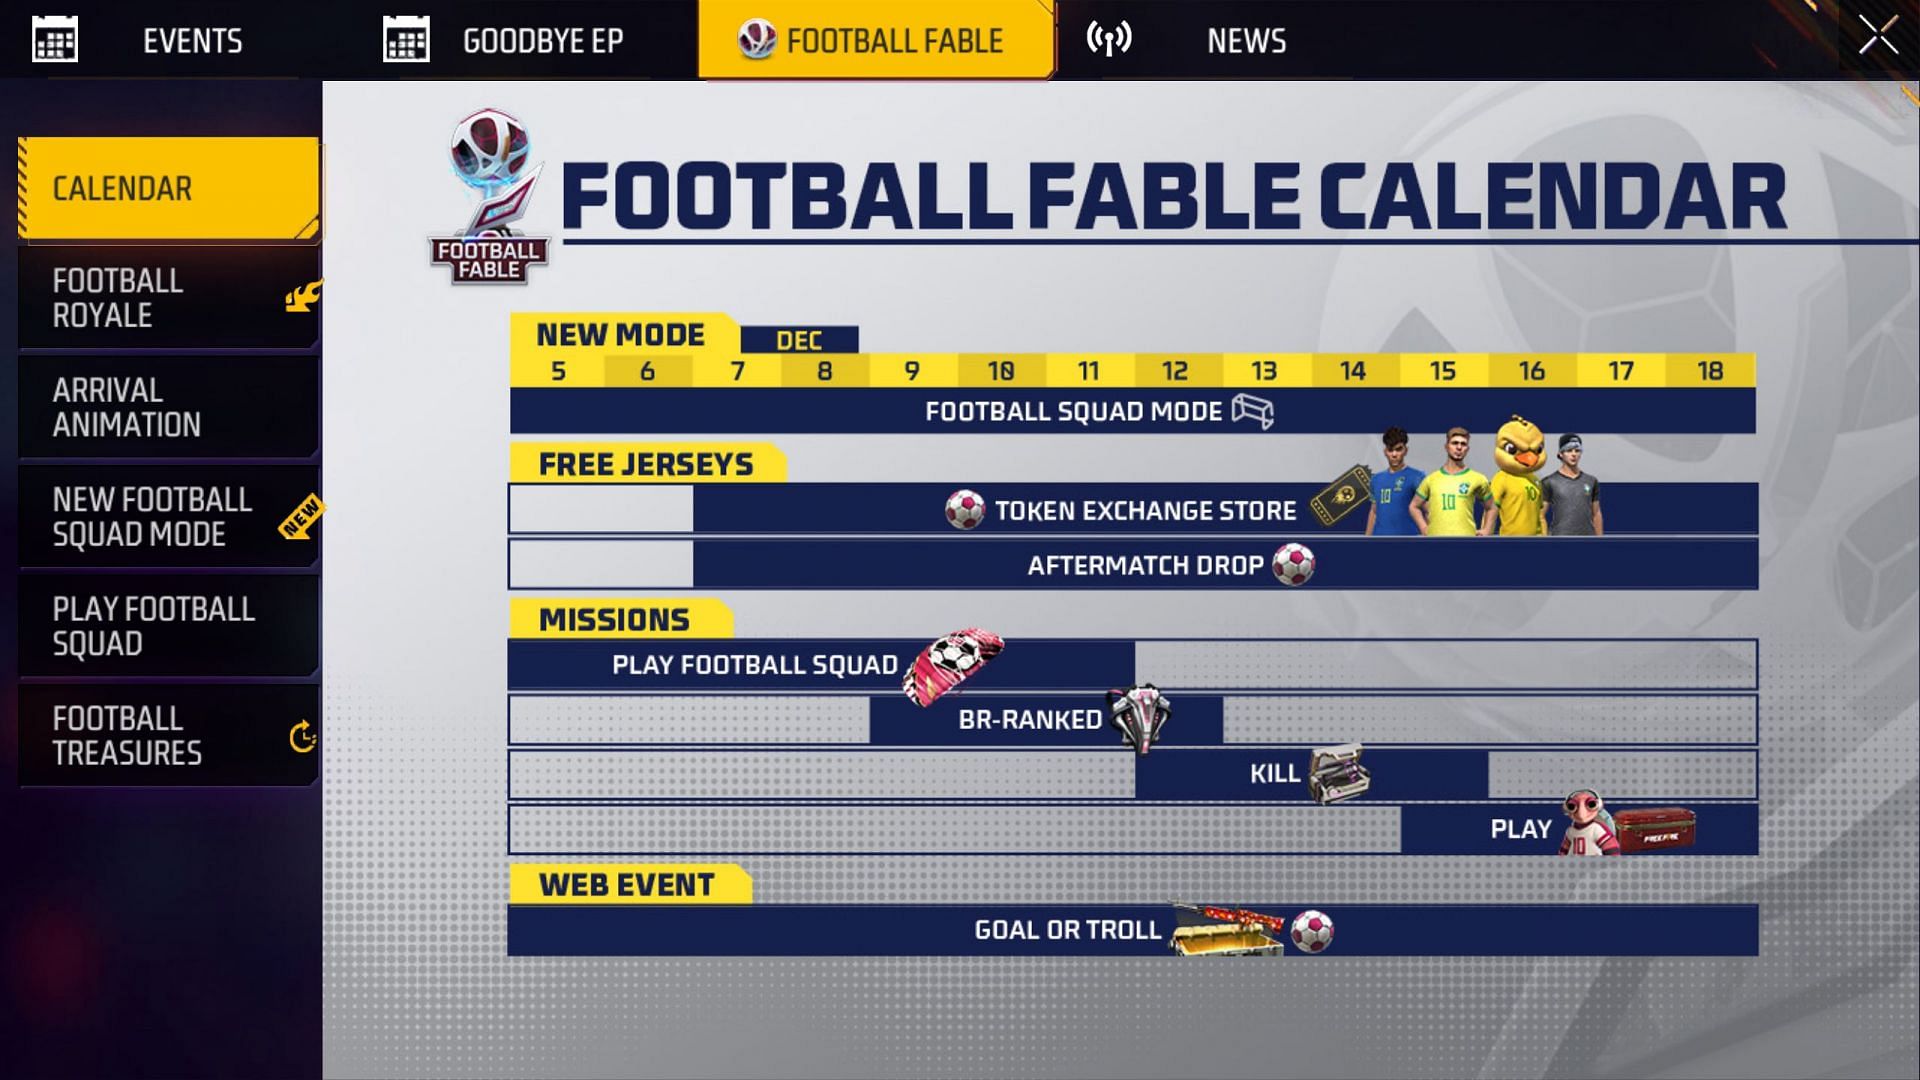 The following are the details about the Football Fable event calendar in the game (Image via Garena)